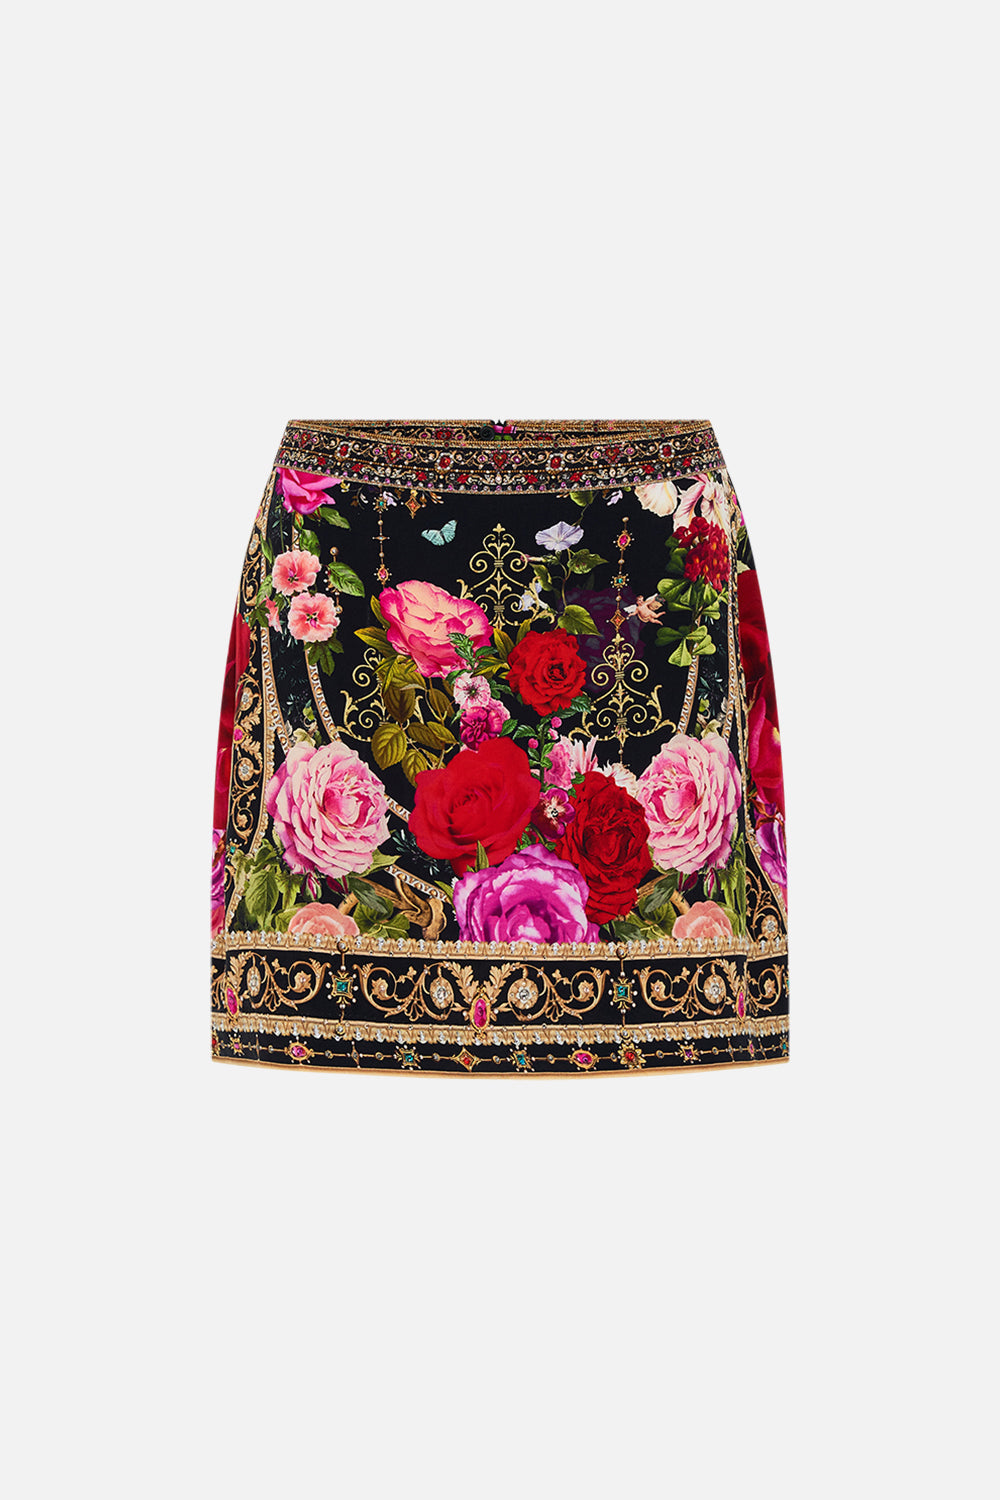 CAMILLA floral mini skirt in Reservation For Love print